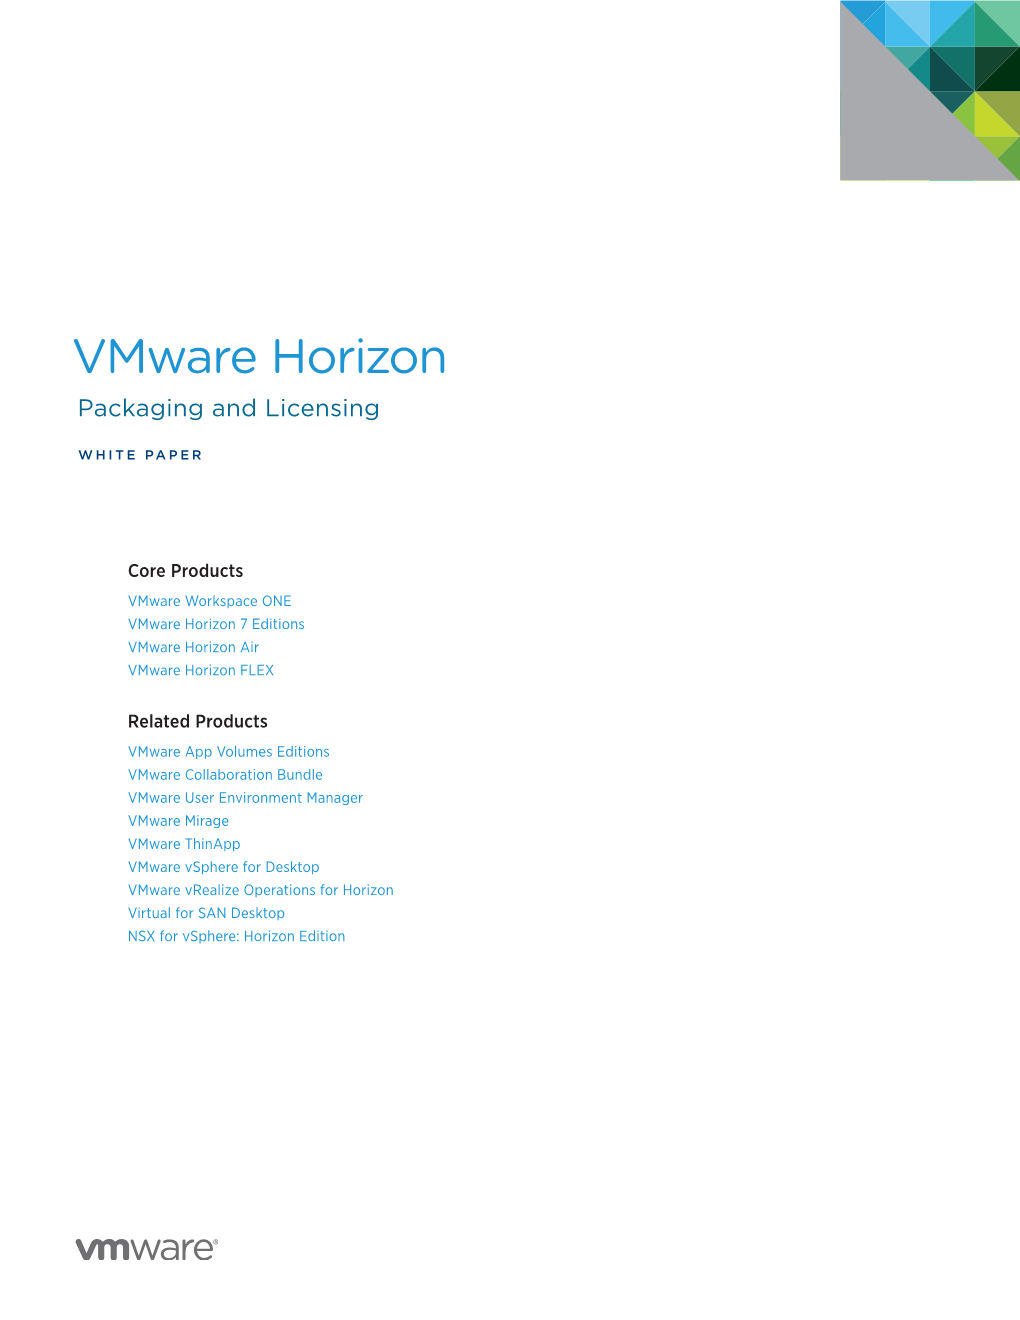 Vmware Horizon Pricing Packaging and Licensing (PPL) White Paper